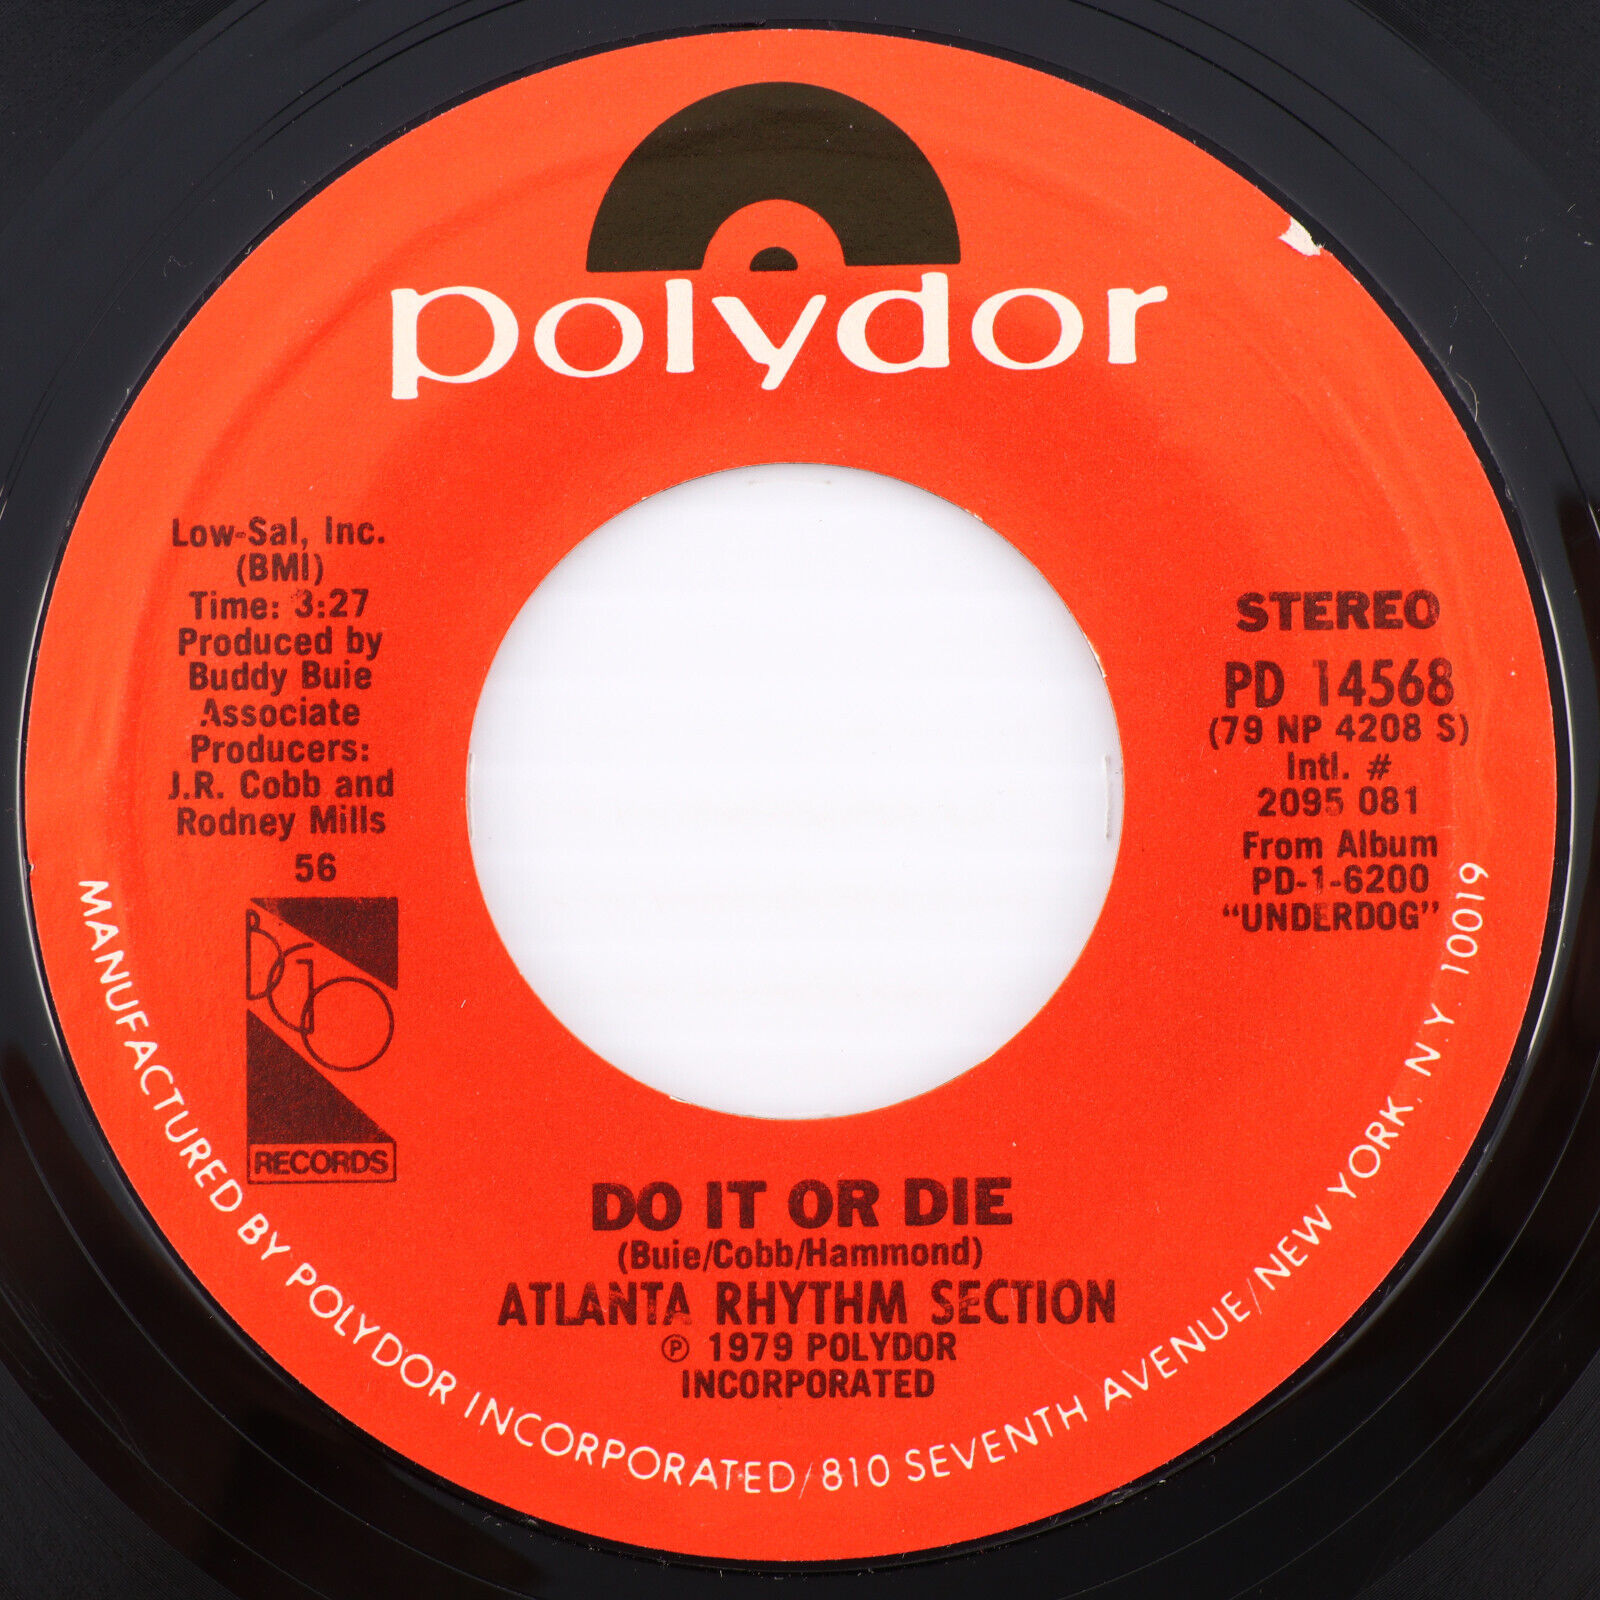 Atlanta Rhythm Section  Do It Or Die / My Song - 1979 45 rpm 7" Single PD 14568